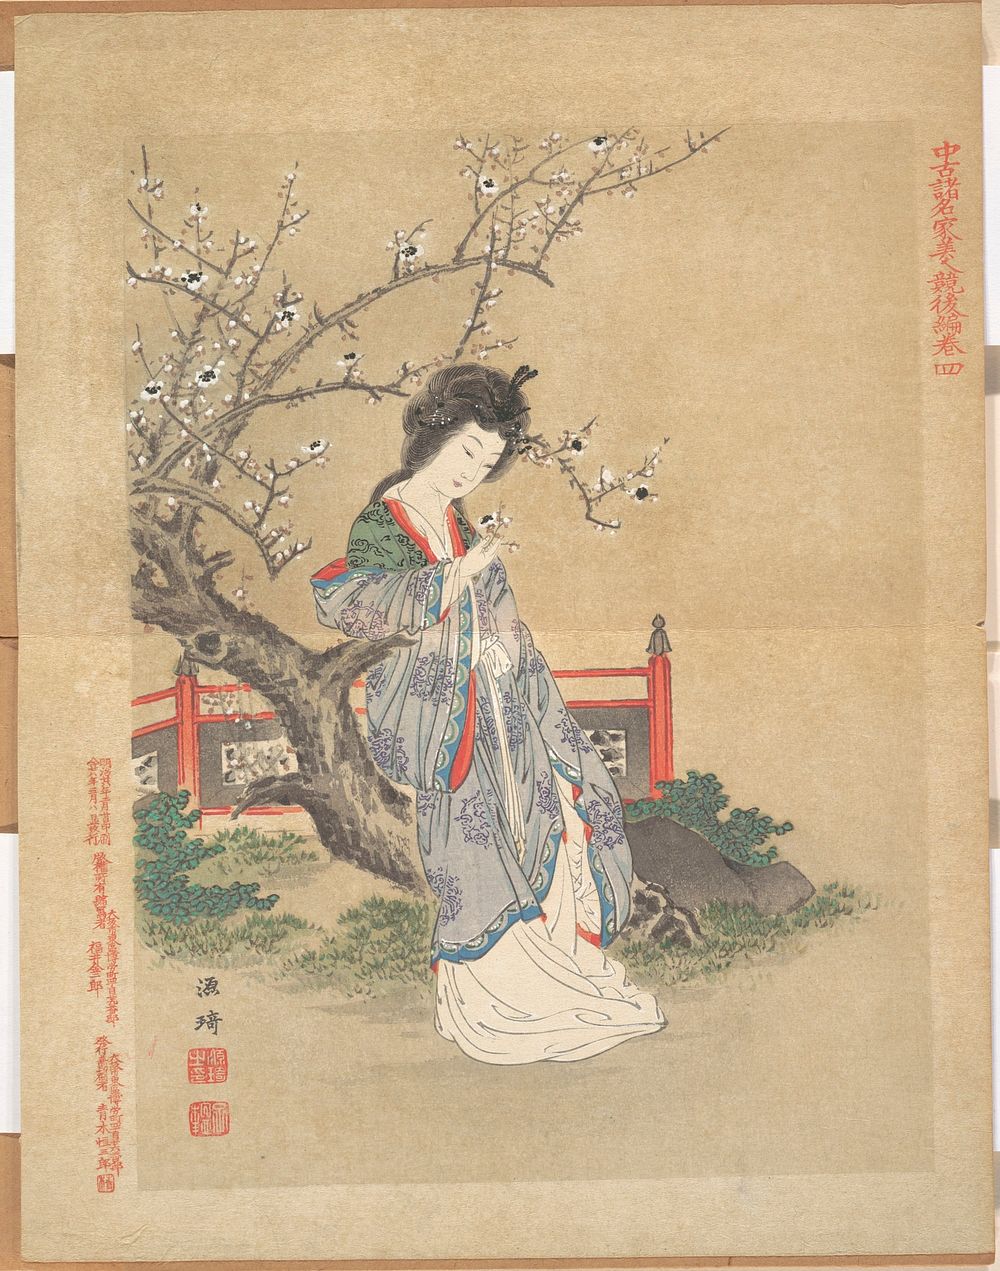 Chinese Beauty Beside a Plum Tree, leaf from the album “A Contest of Beauties from the Near and Distant Past” (Chūko…